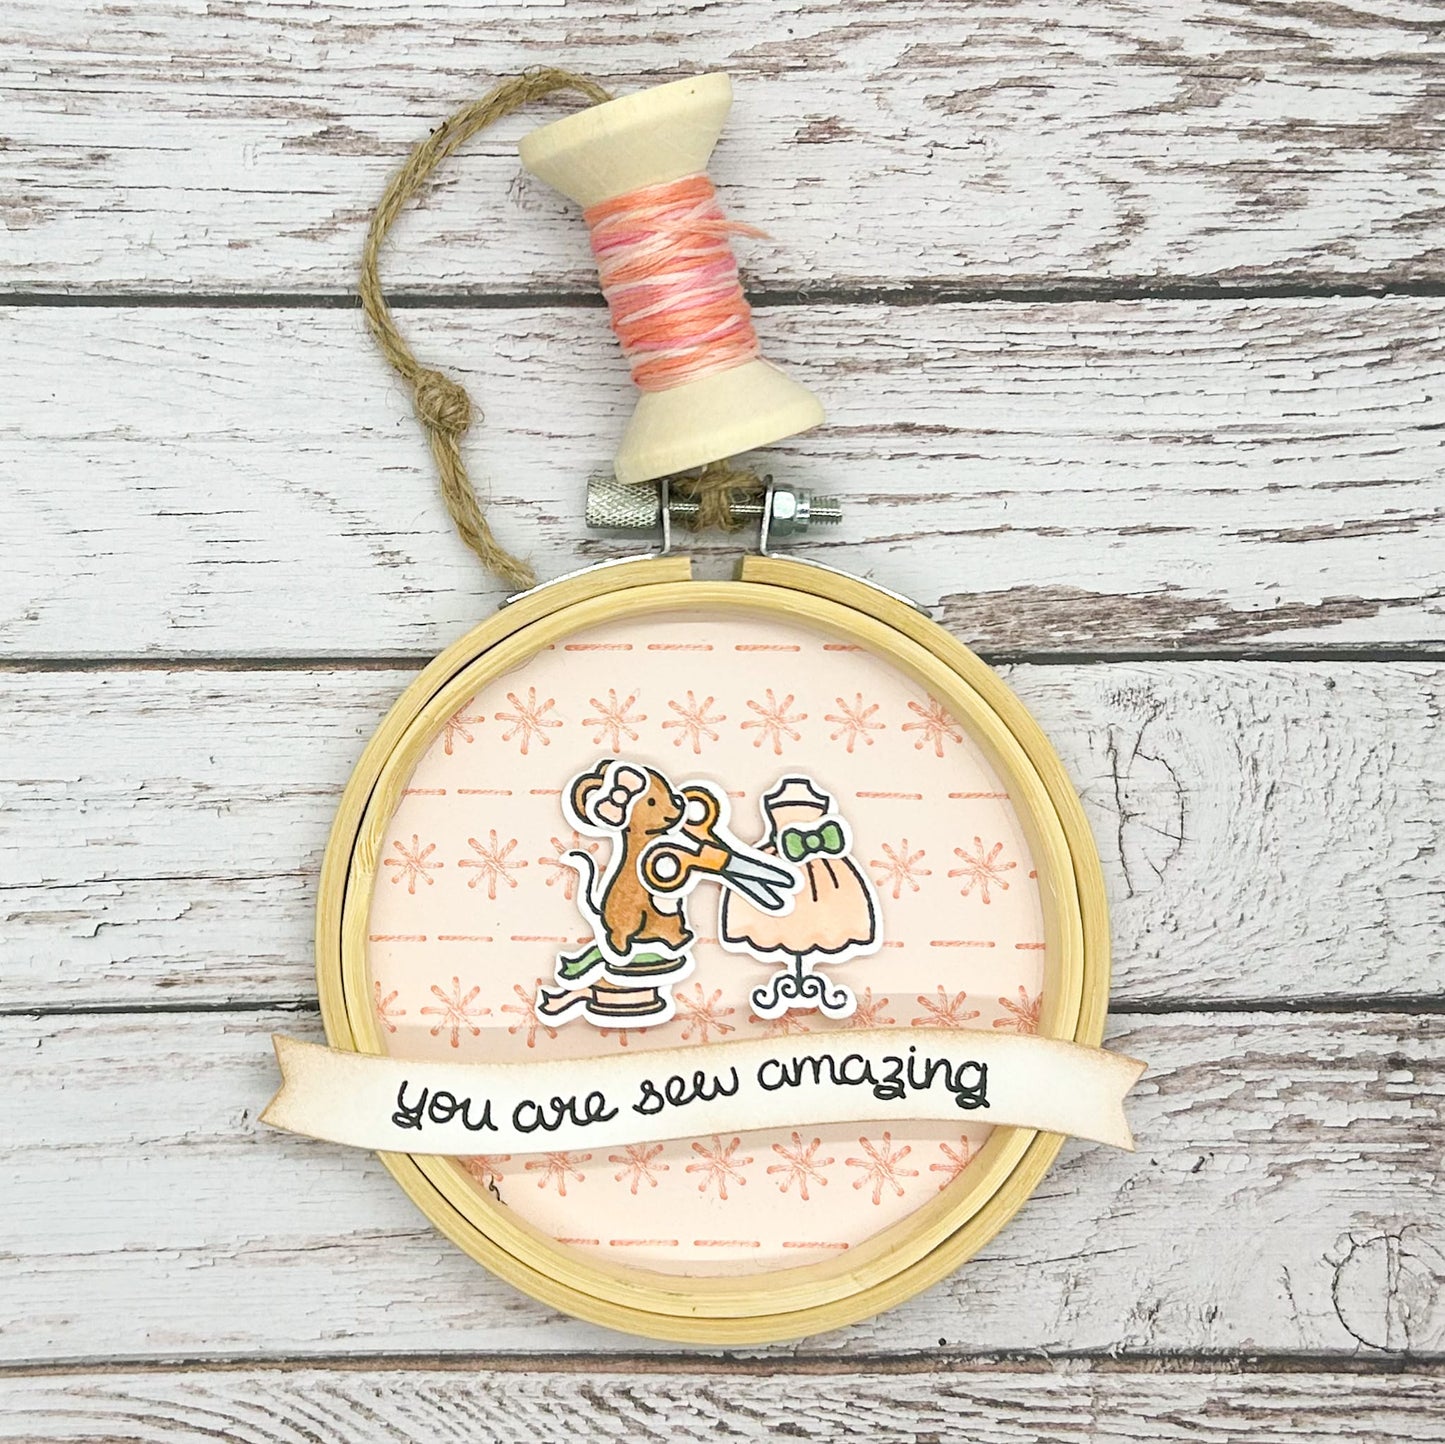 Dressmaking Mouse Sew Amazing Embroidery Hoop Hanging Ornament